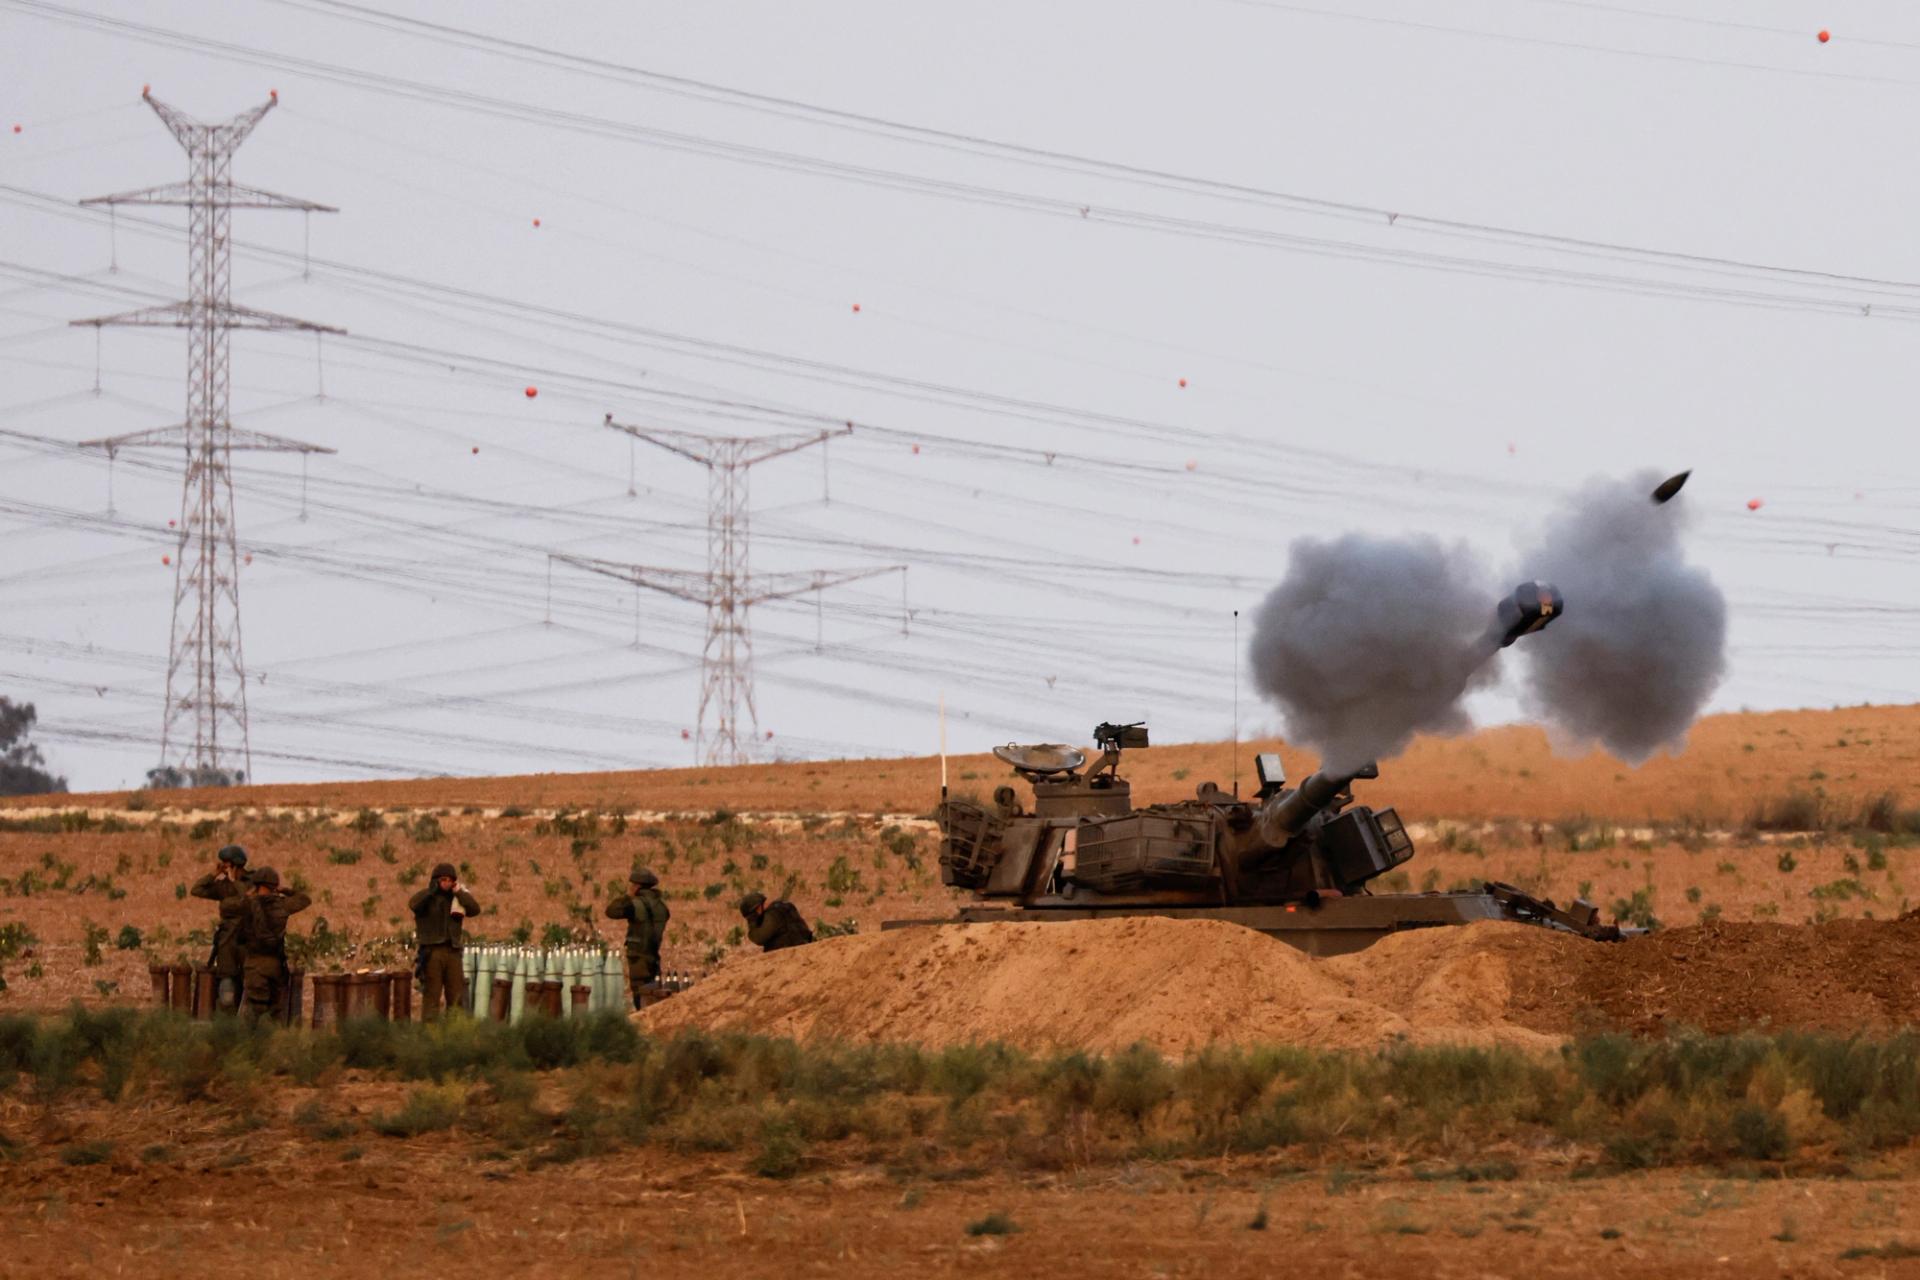 Artillery on the Israeli side of its border with the Gaza Strip